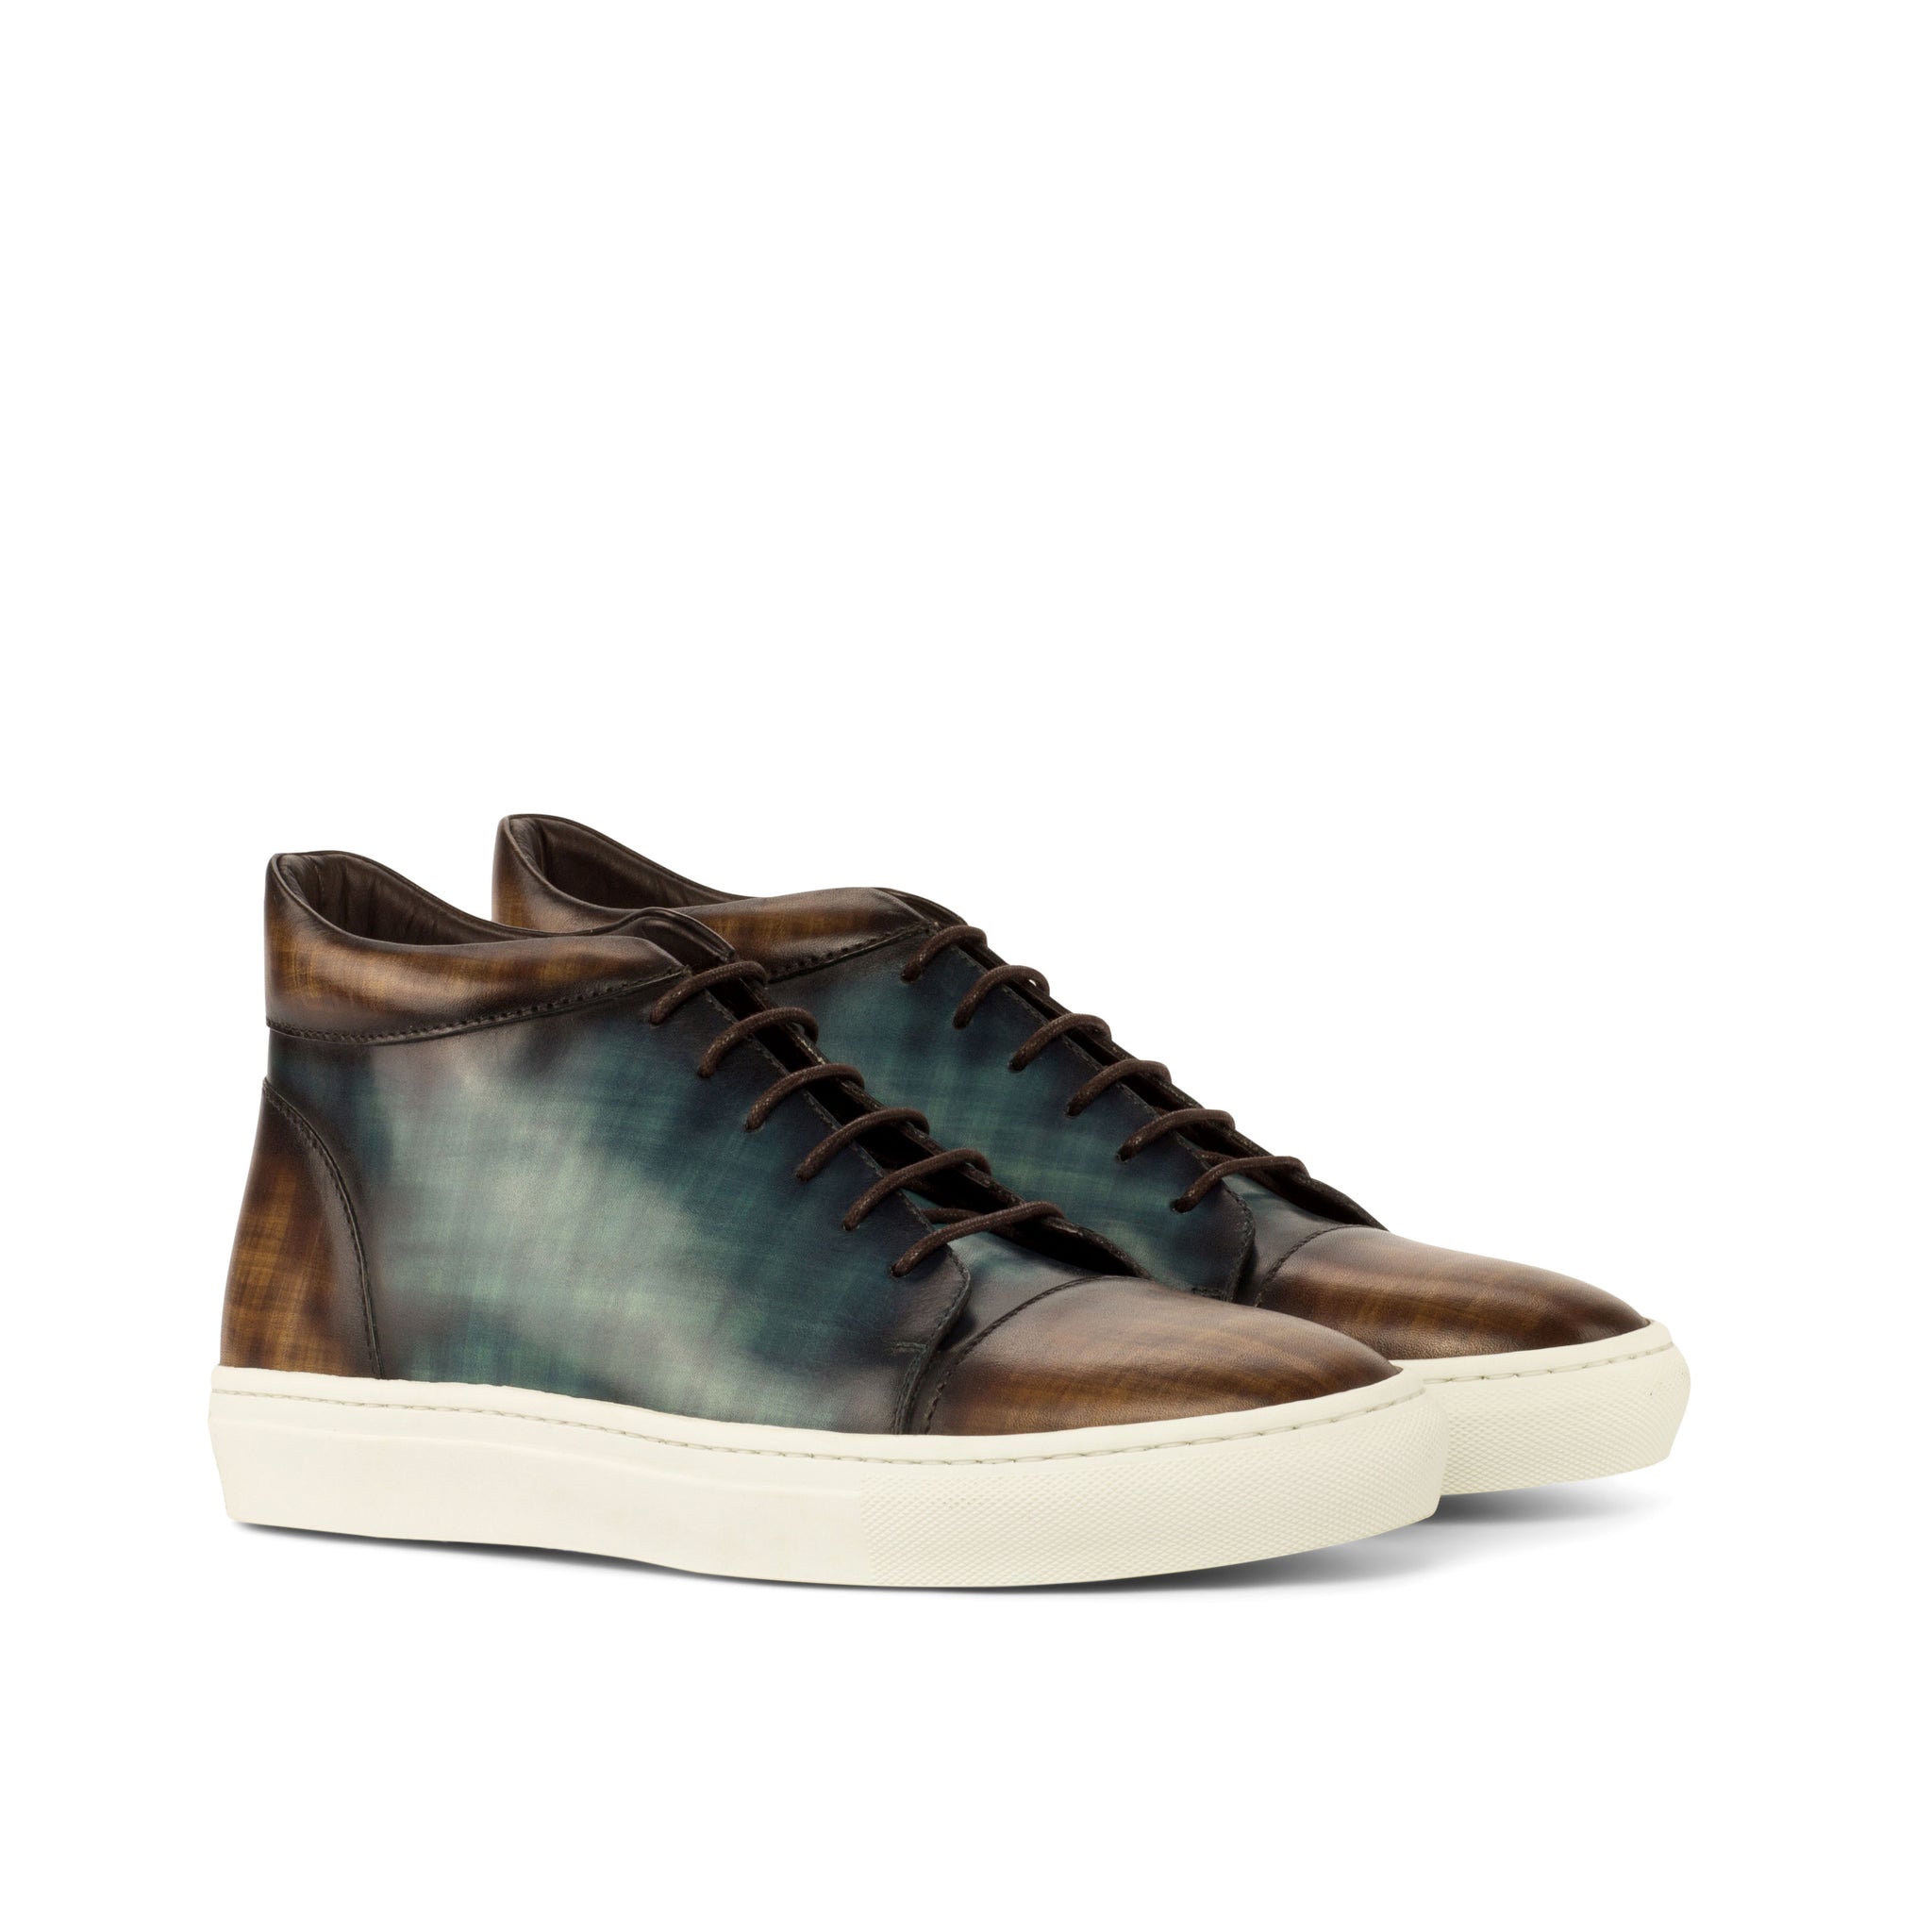 Unique Handcrafted High Top Sneaker - Patina Medium - Crust Patina Brown-Crust Patina Turquoise